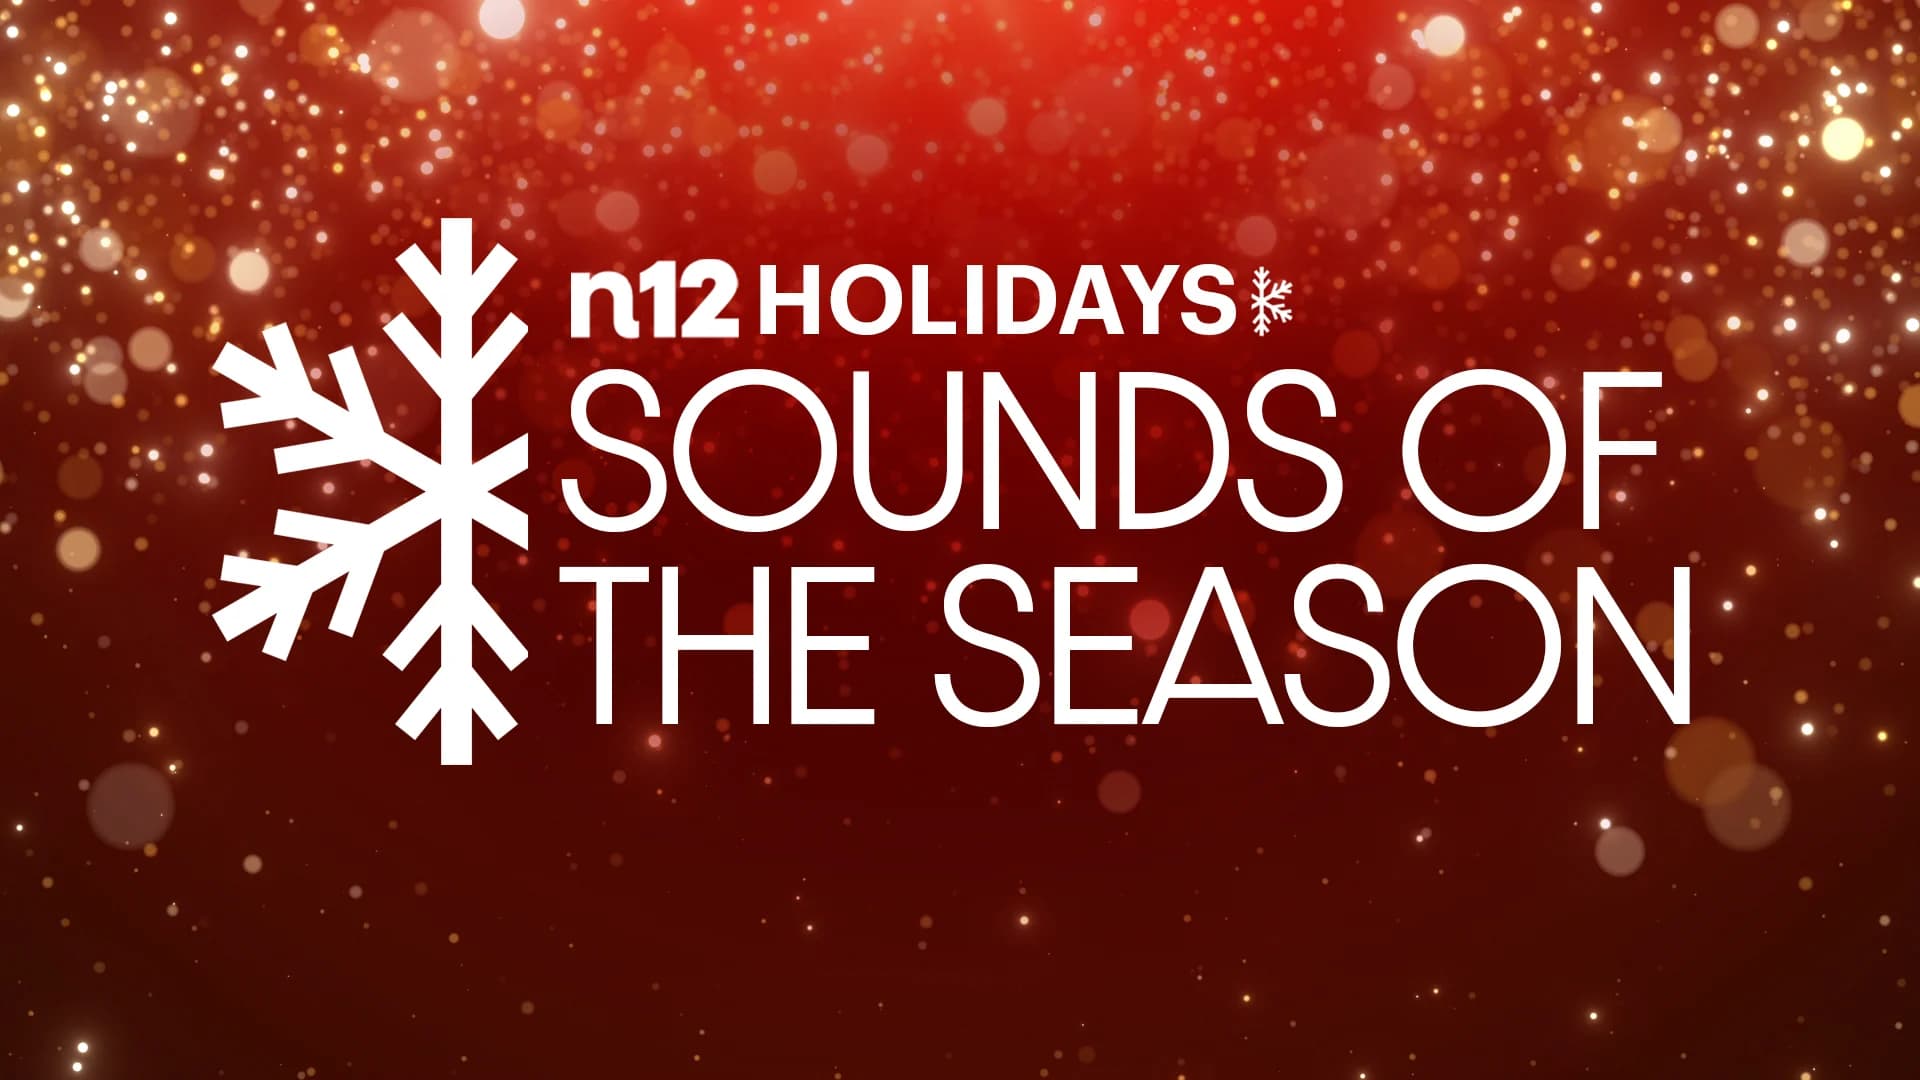 Sounds of the Season winners in Connecticut revealed